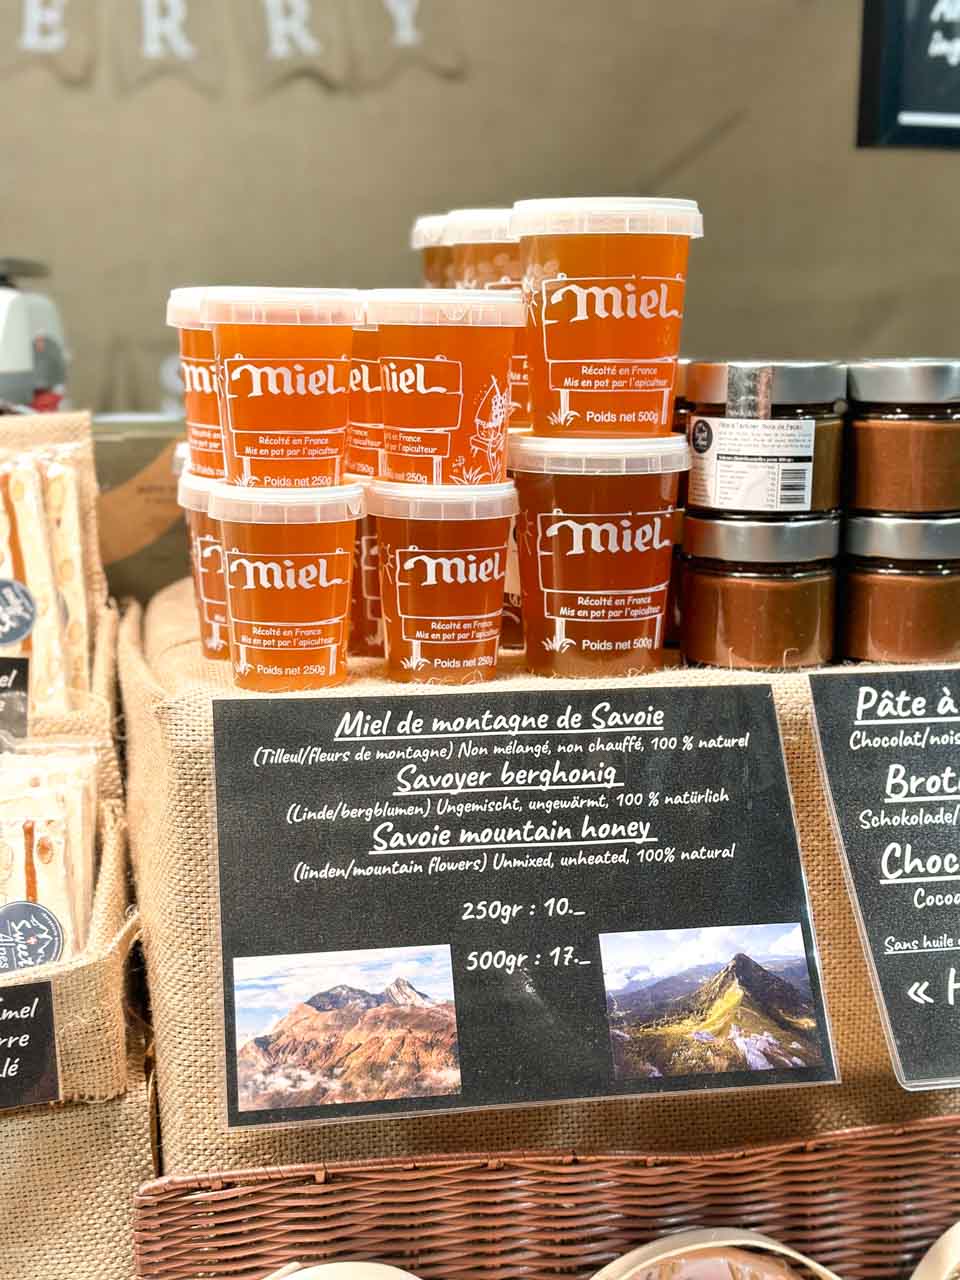 Jars of Savoie honey on display with price tags at a Christmas market stall on Barfüsserplatz in Basel